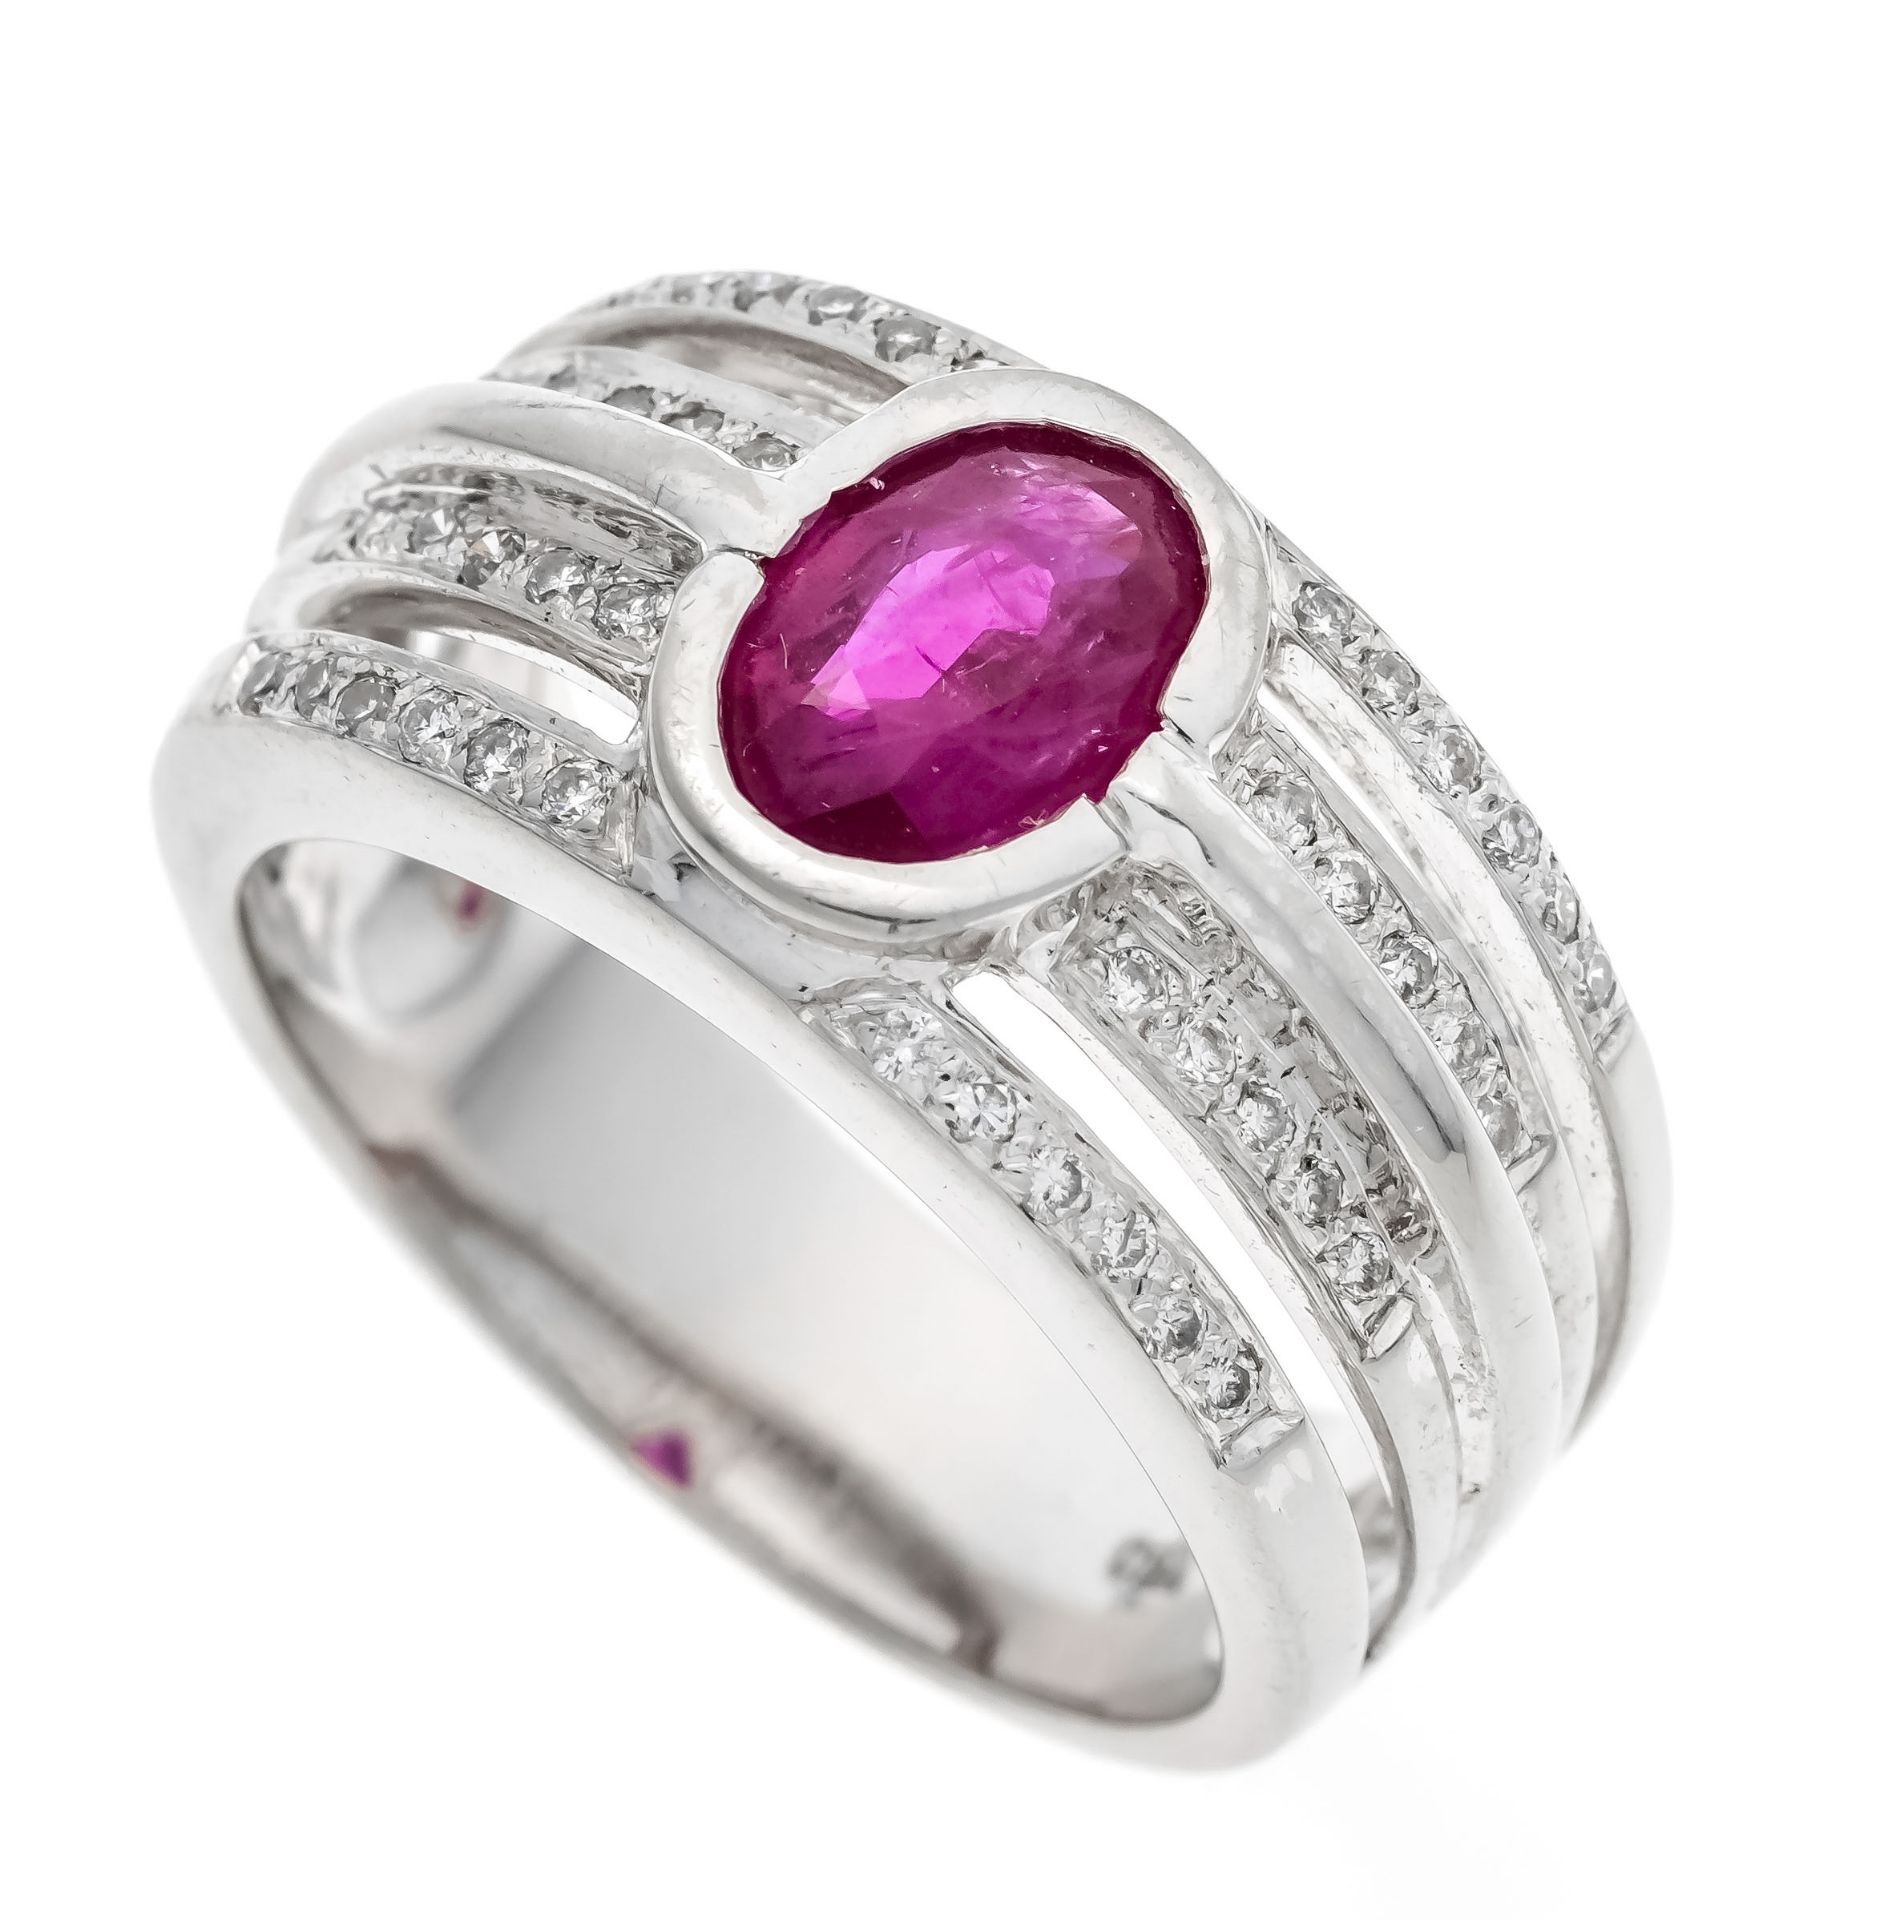 Ruby-brilliant ring GG 750/000 with a very good oval faceted ruby 1.30 ct in an intense raspberry